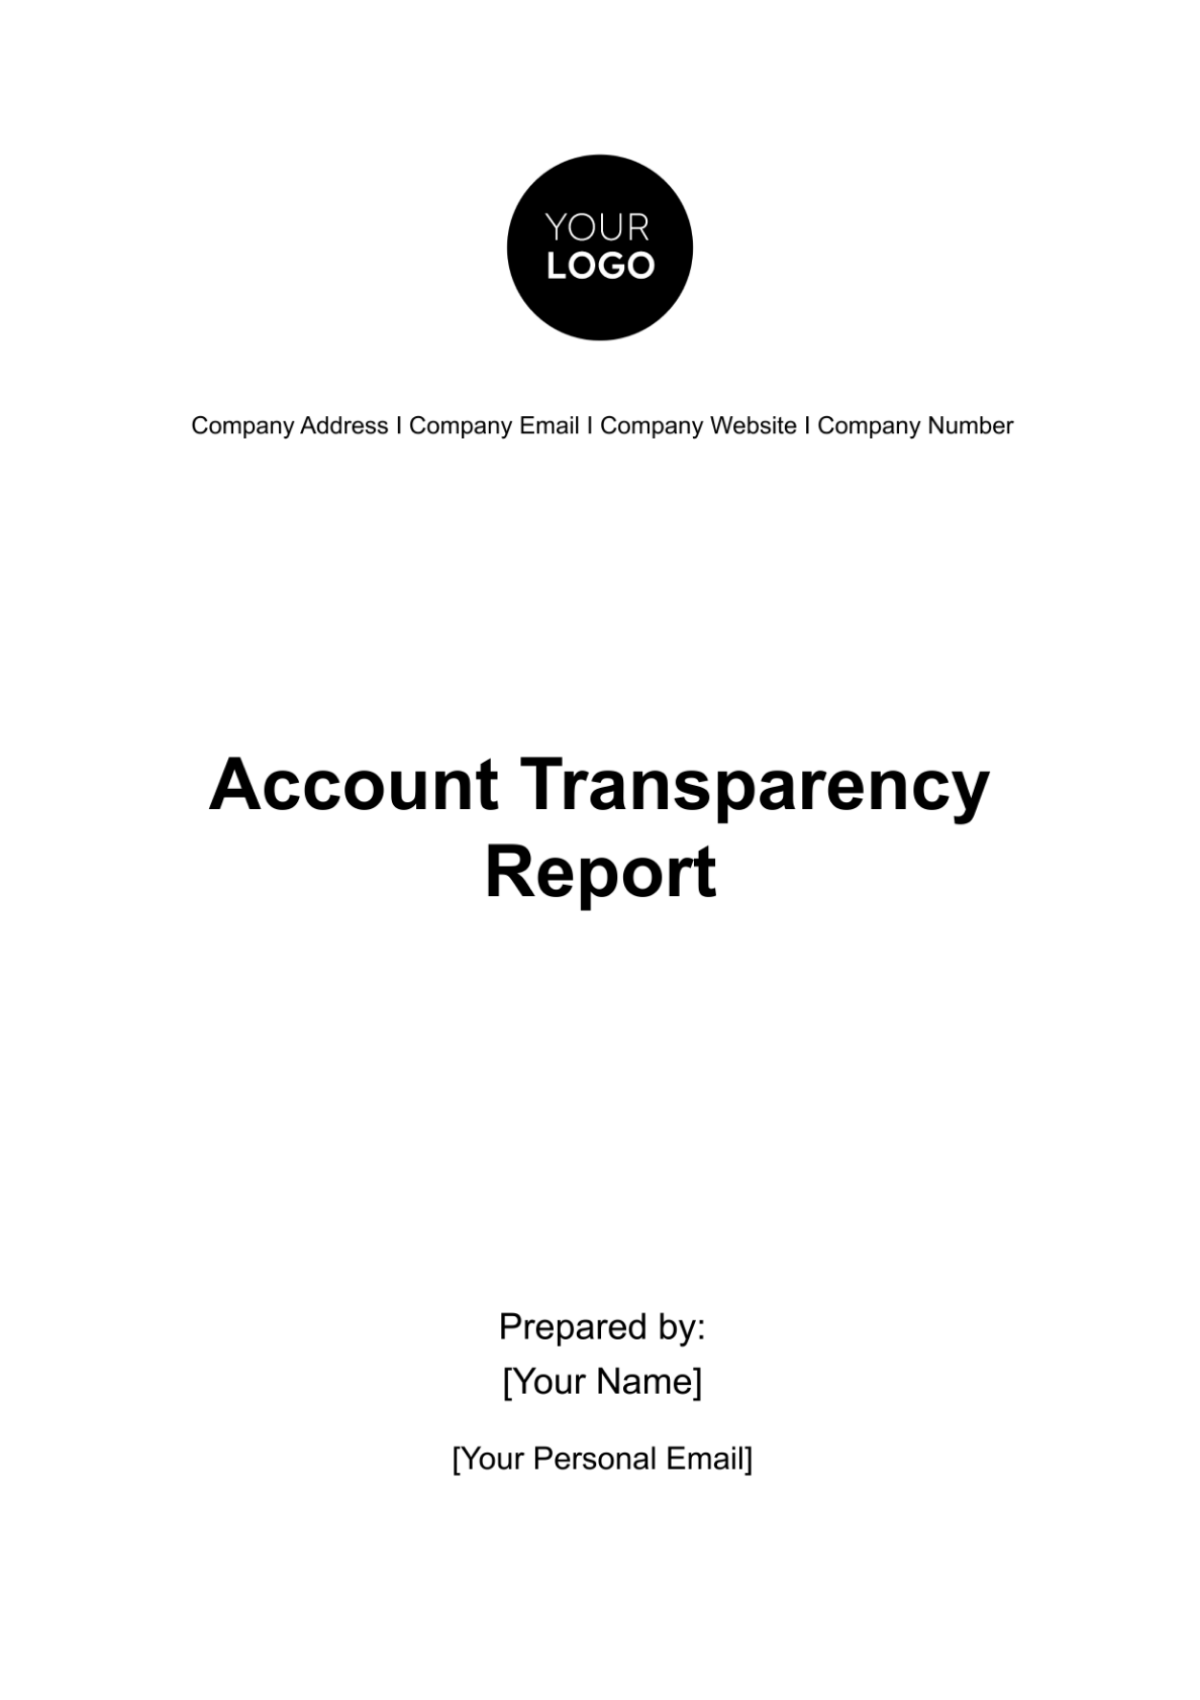 Account Transparency Report Template